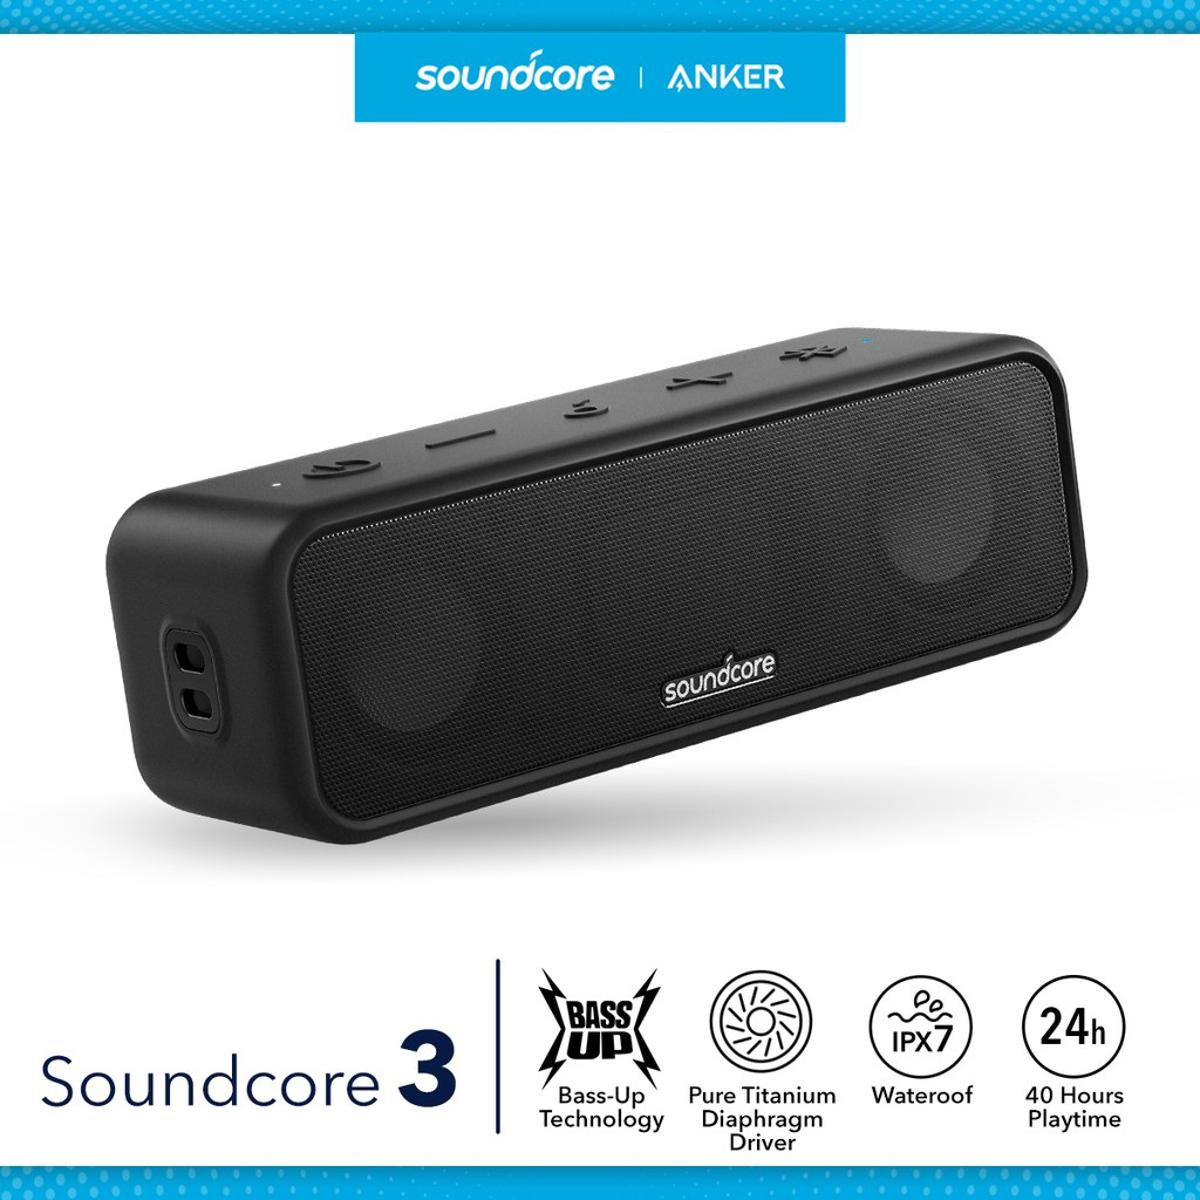 Anker Soundcore 3 Bluetooth Speaker with Stereo Sound, Pure Titanium Diaphragm Drivers, PartyCast Technology, BassUp, 24H Playtime